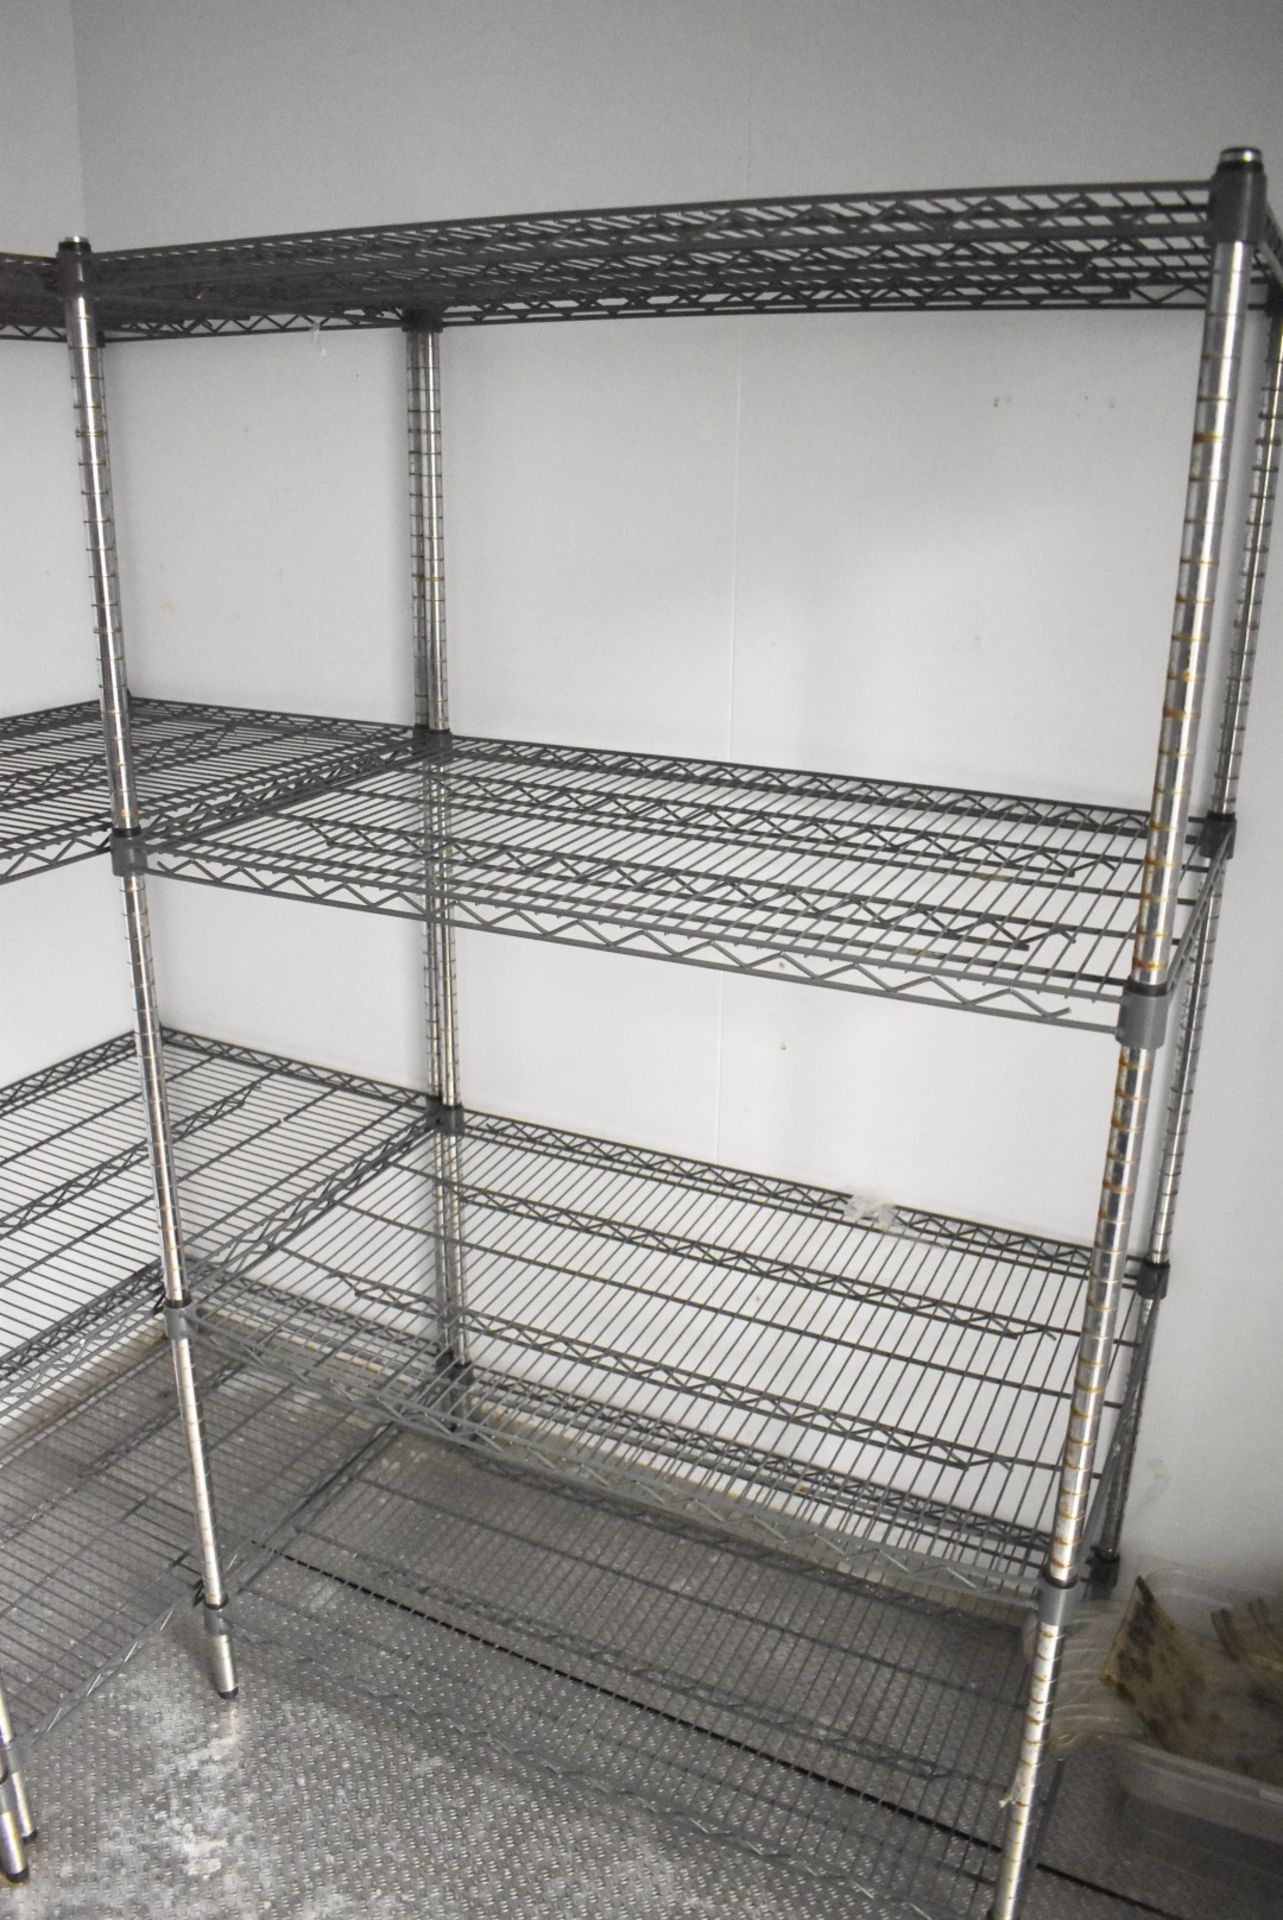 5 x Assorted Cold Room Wire Storage Shelf Units With Coated Shelves - H168 x W90-124 x D60 cms - Image 4 of 9